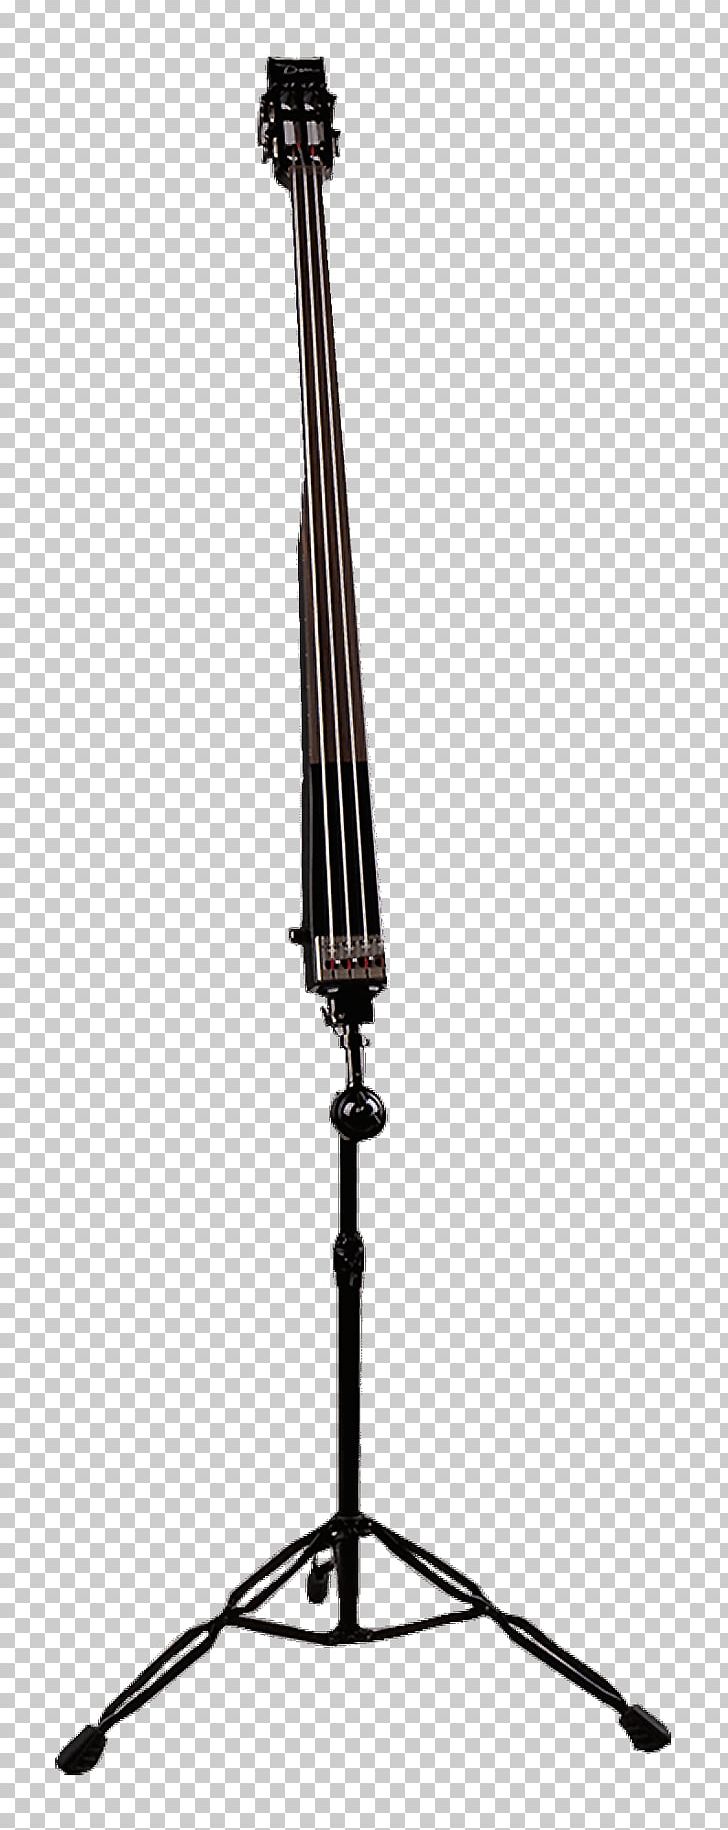 Bass Guitar Double Bass Dean Upright Pace Electric Bass Electric Upright Bass Musical Instruments PNG, Clipart, Bass, Black And White, Bridge, Cbk, Dean Free PNG Download